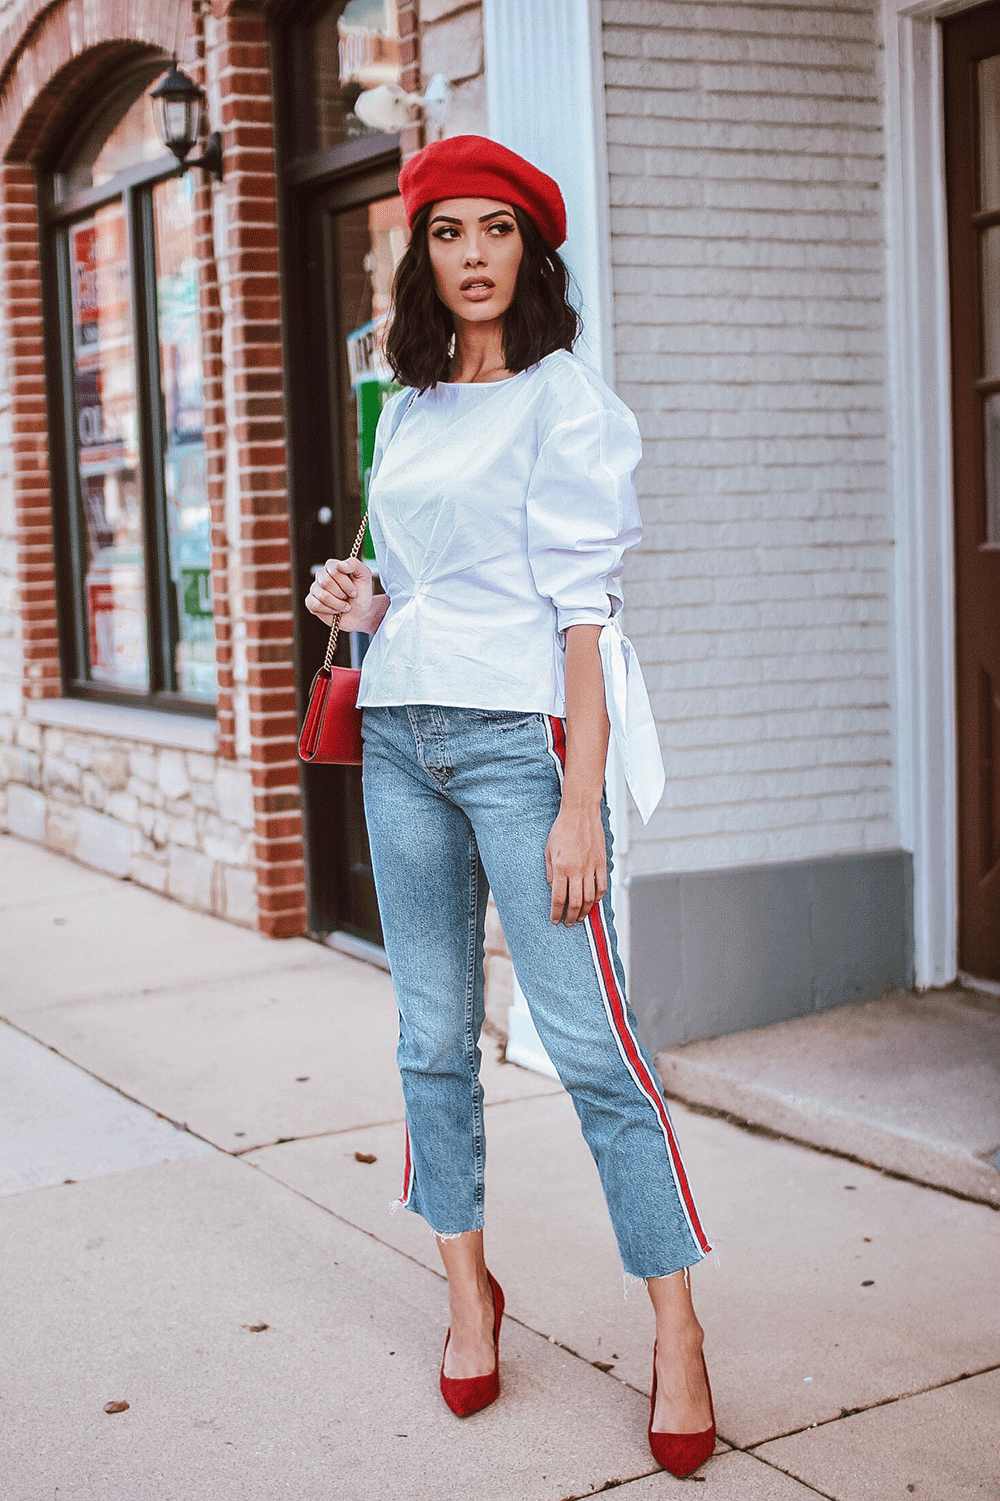 Basic White Shirt with Jeans Outfit